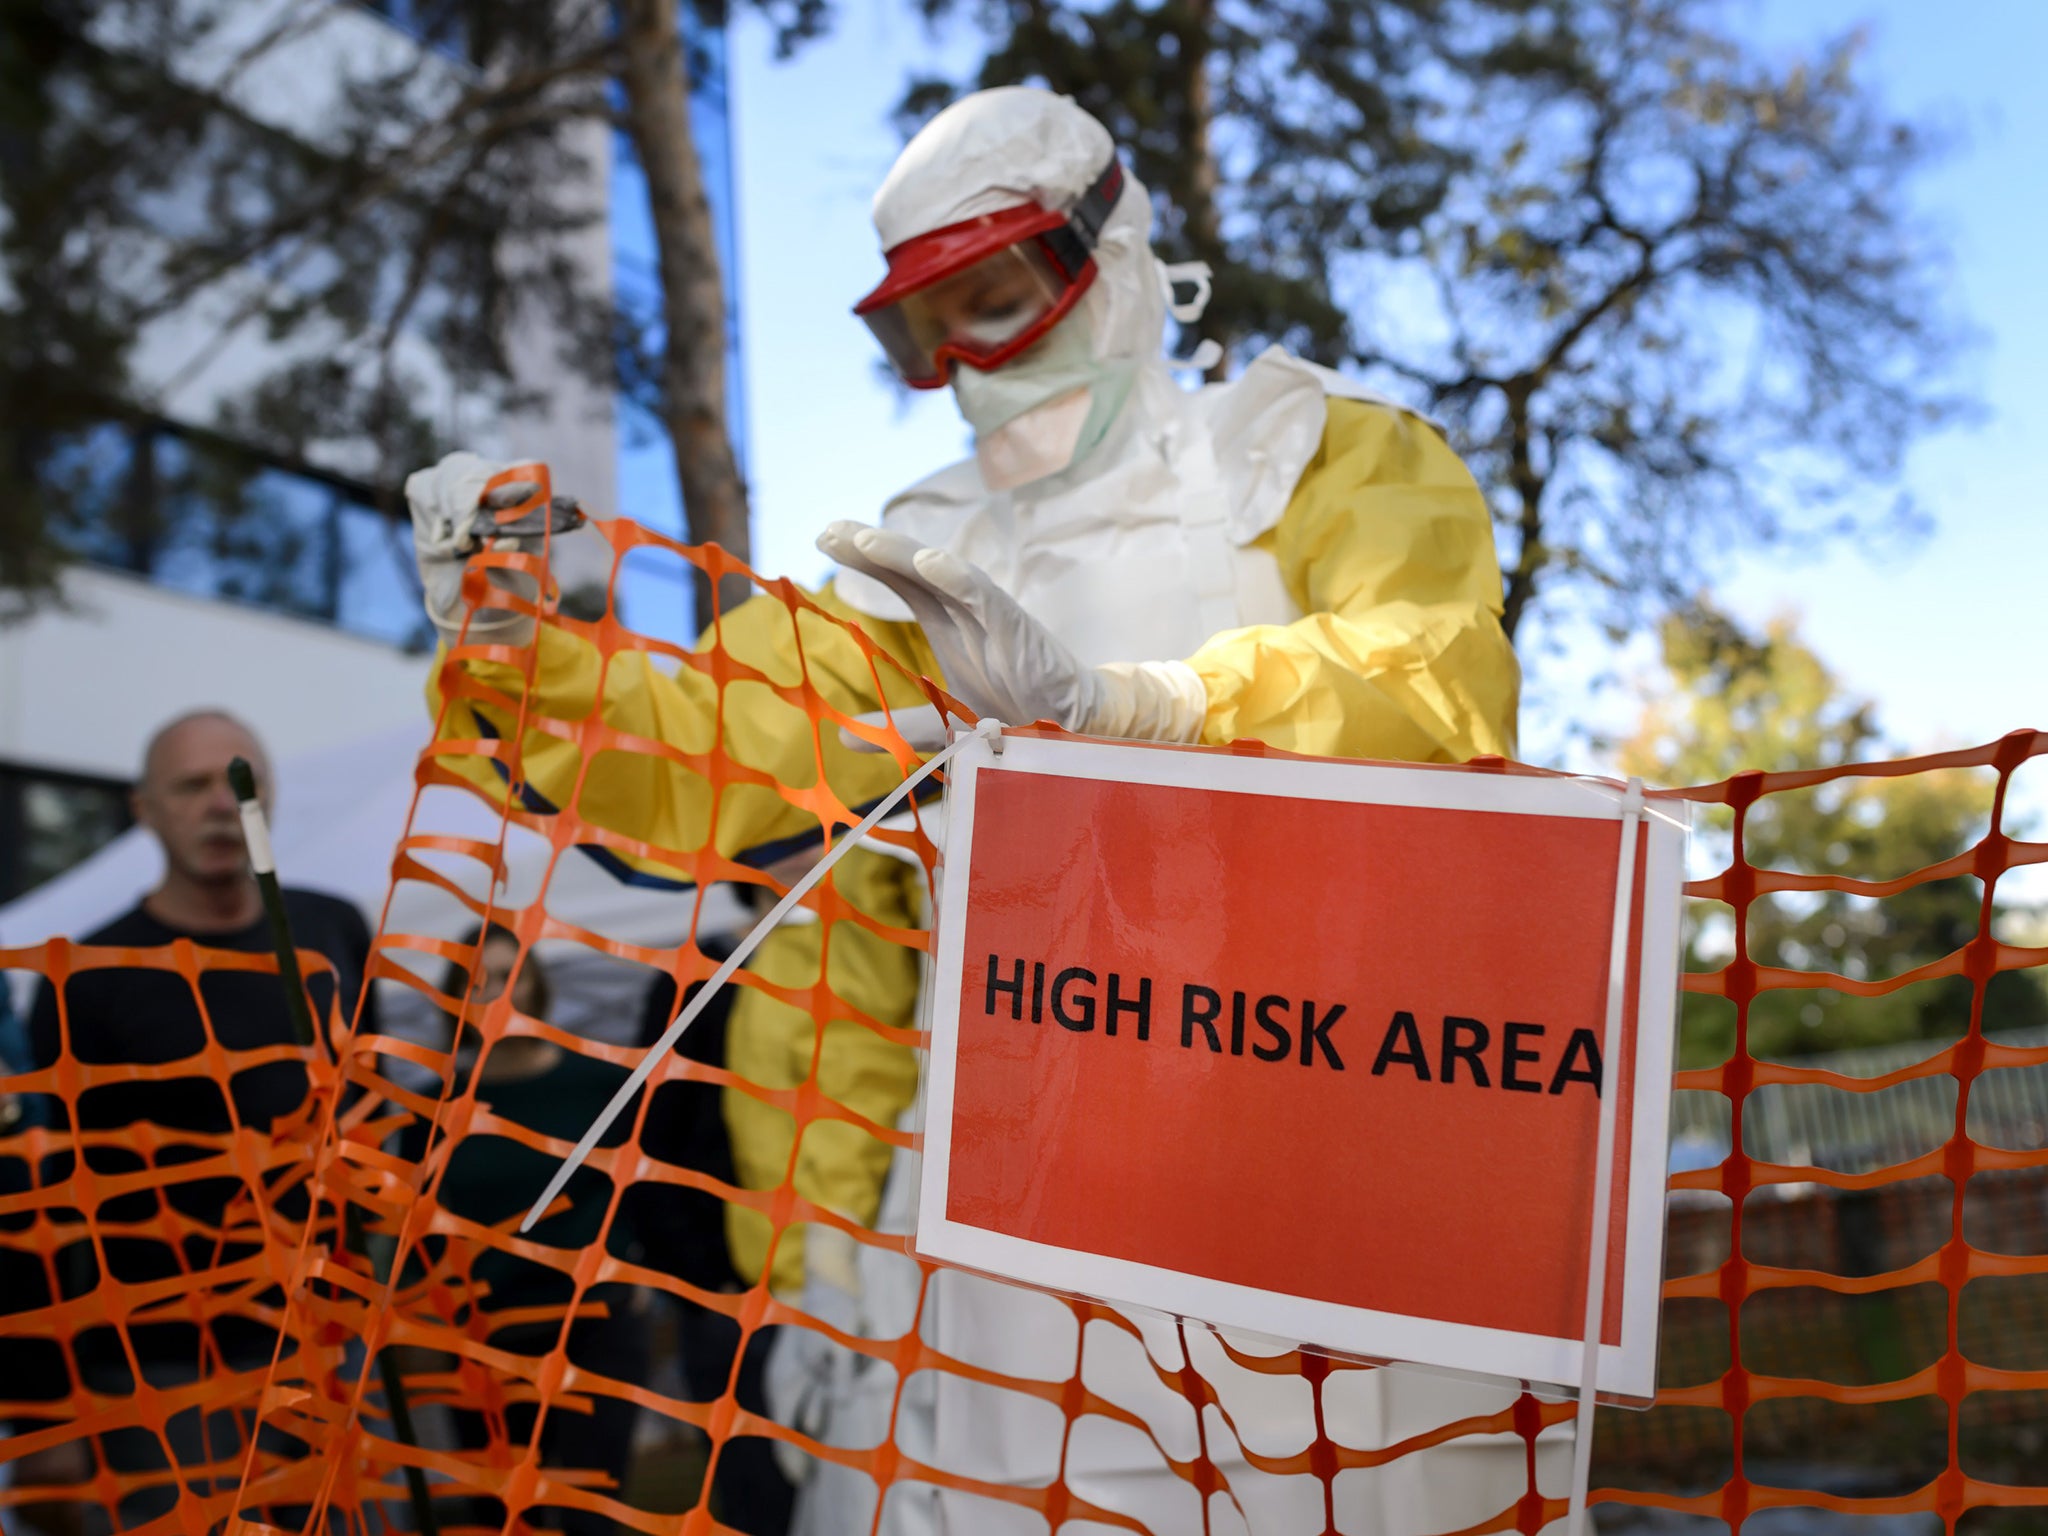 Health workers of the International Federation of Red Cross (IFRC) and Medical charity Medecins Sans Frontieres (MSF) take part in a pre-deployment training for staff that is heading to Ebola area at the IFRC headquarters in Geneva 